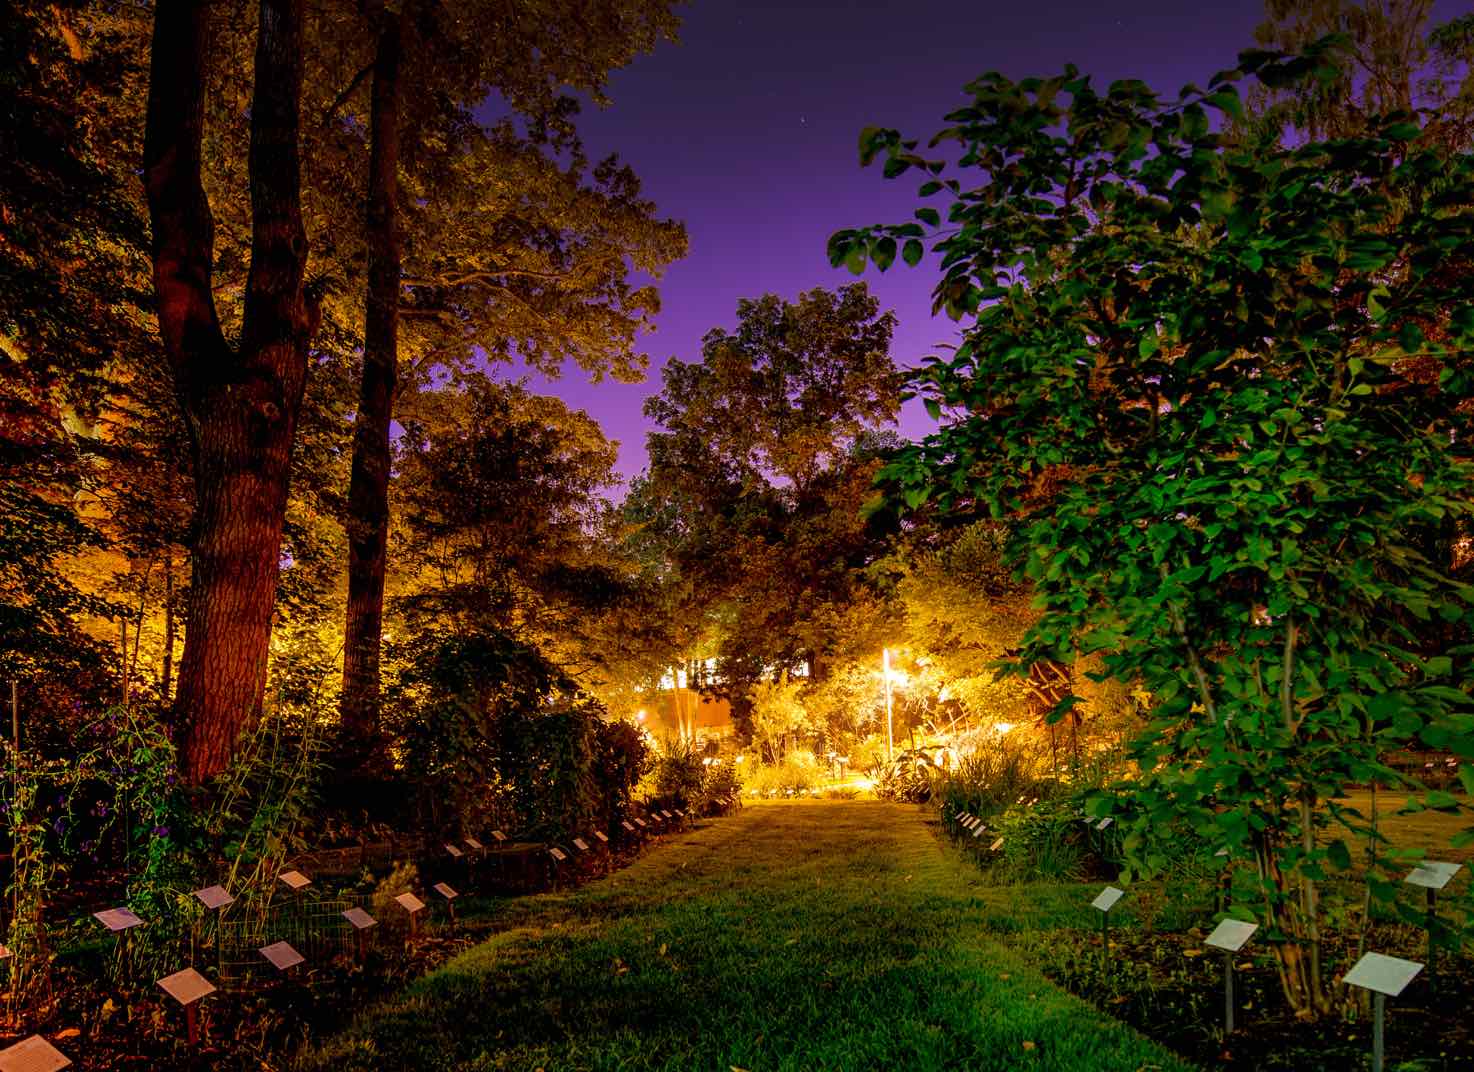 Beal Garden glows with a pink and purple sky)